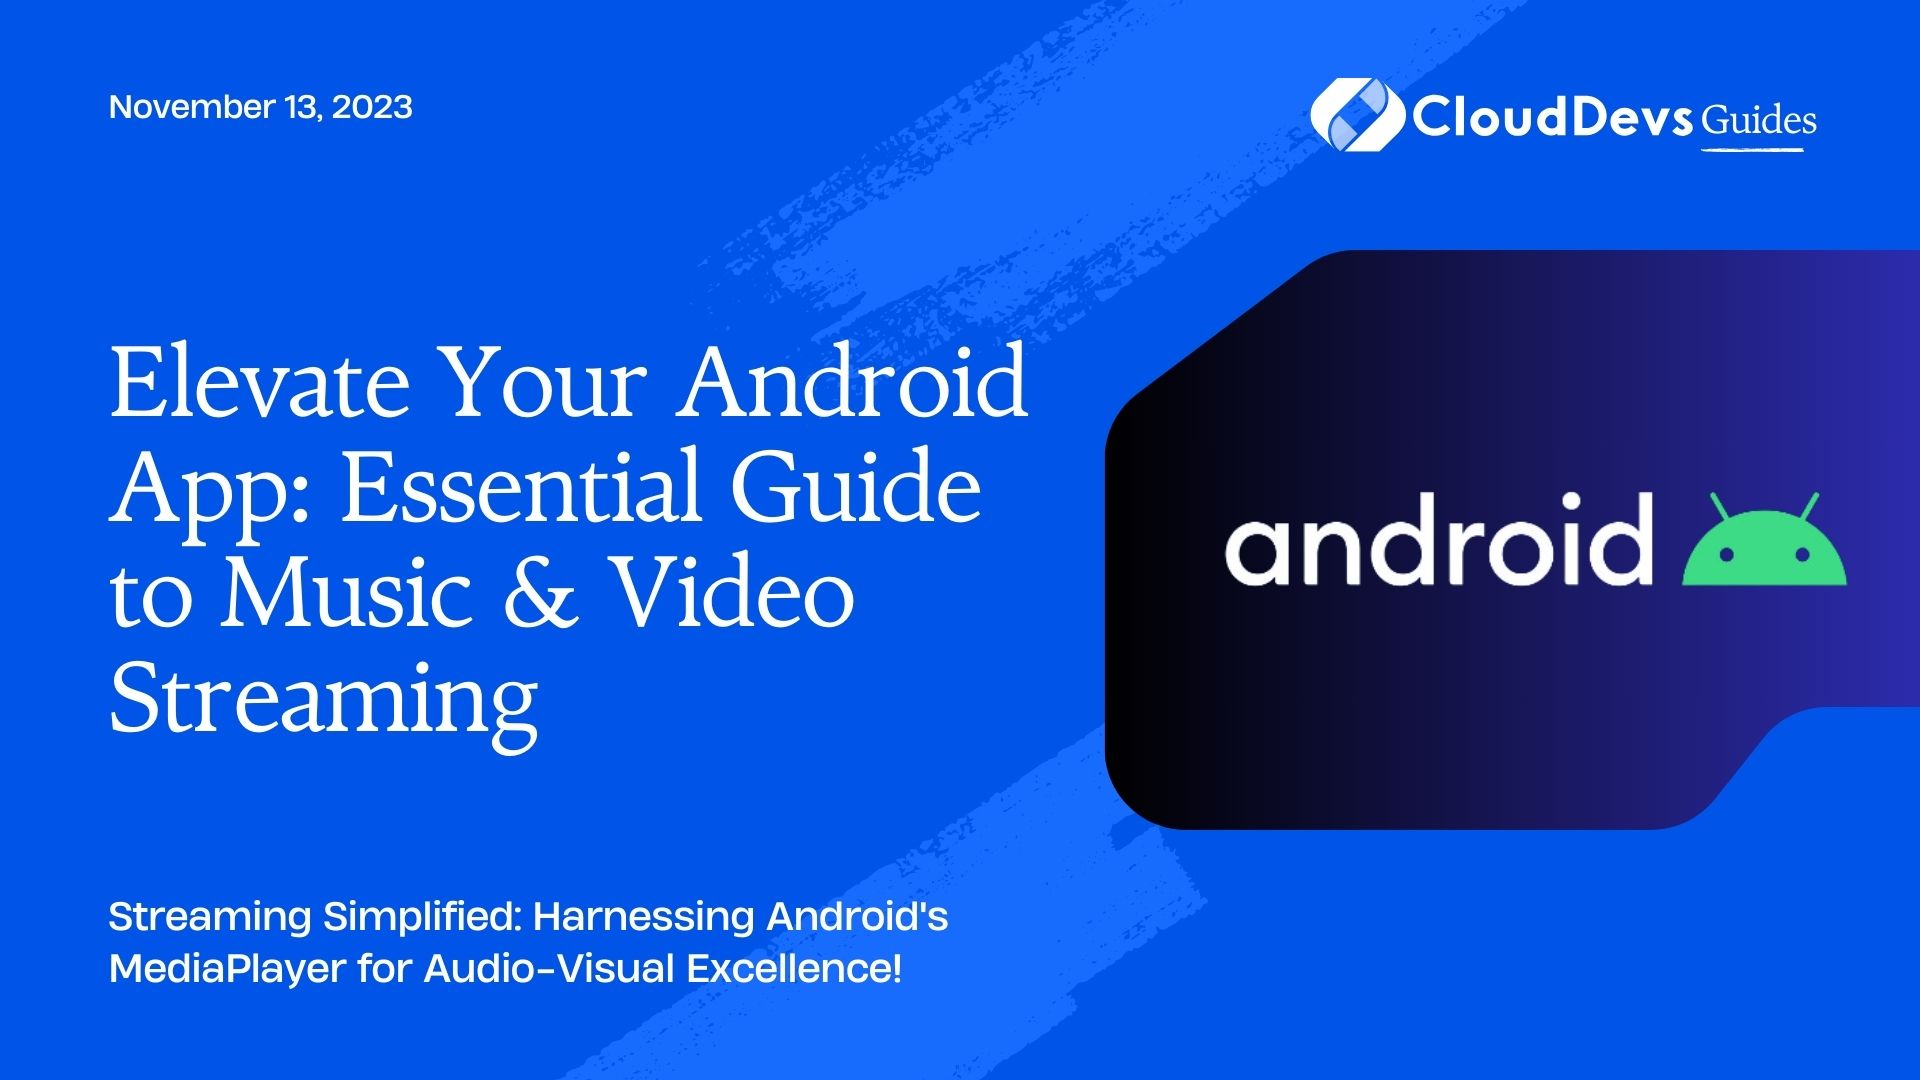 Elevate Your Android App: Essential Guide to Music & Video Streaming